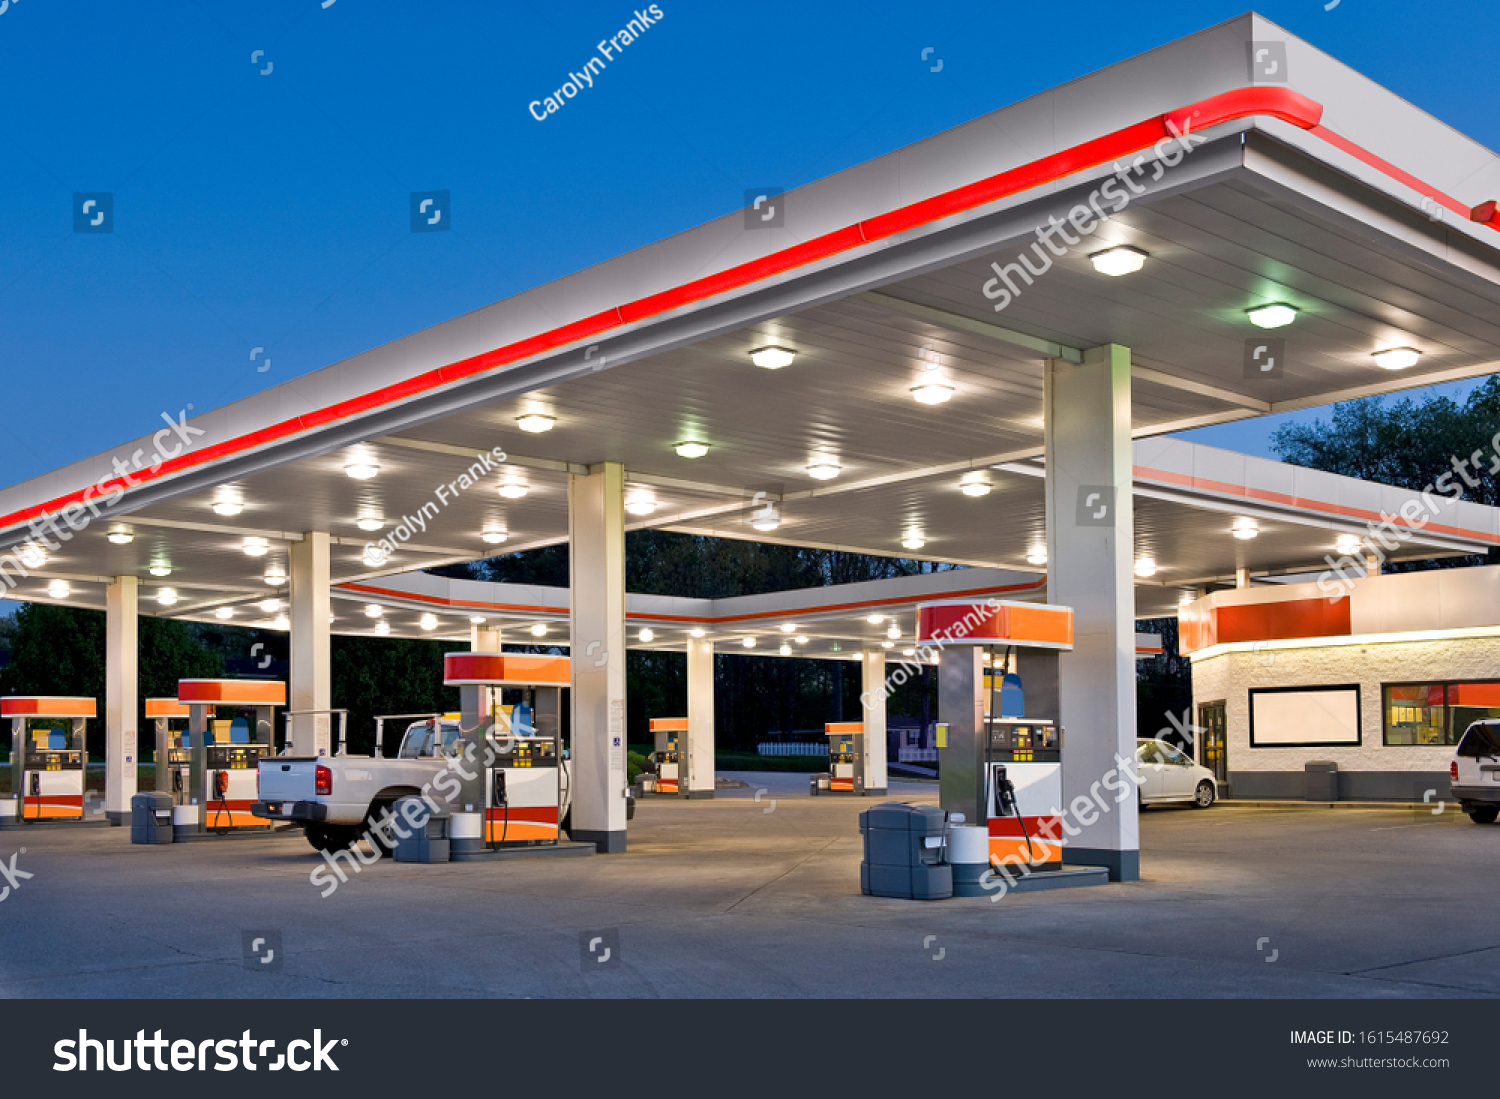 Horizontal shot of a retail gasoline station and convenience store at dusk. #1615487692